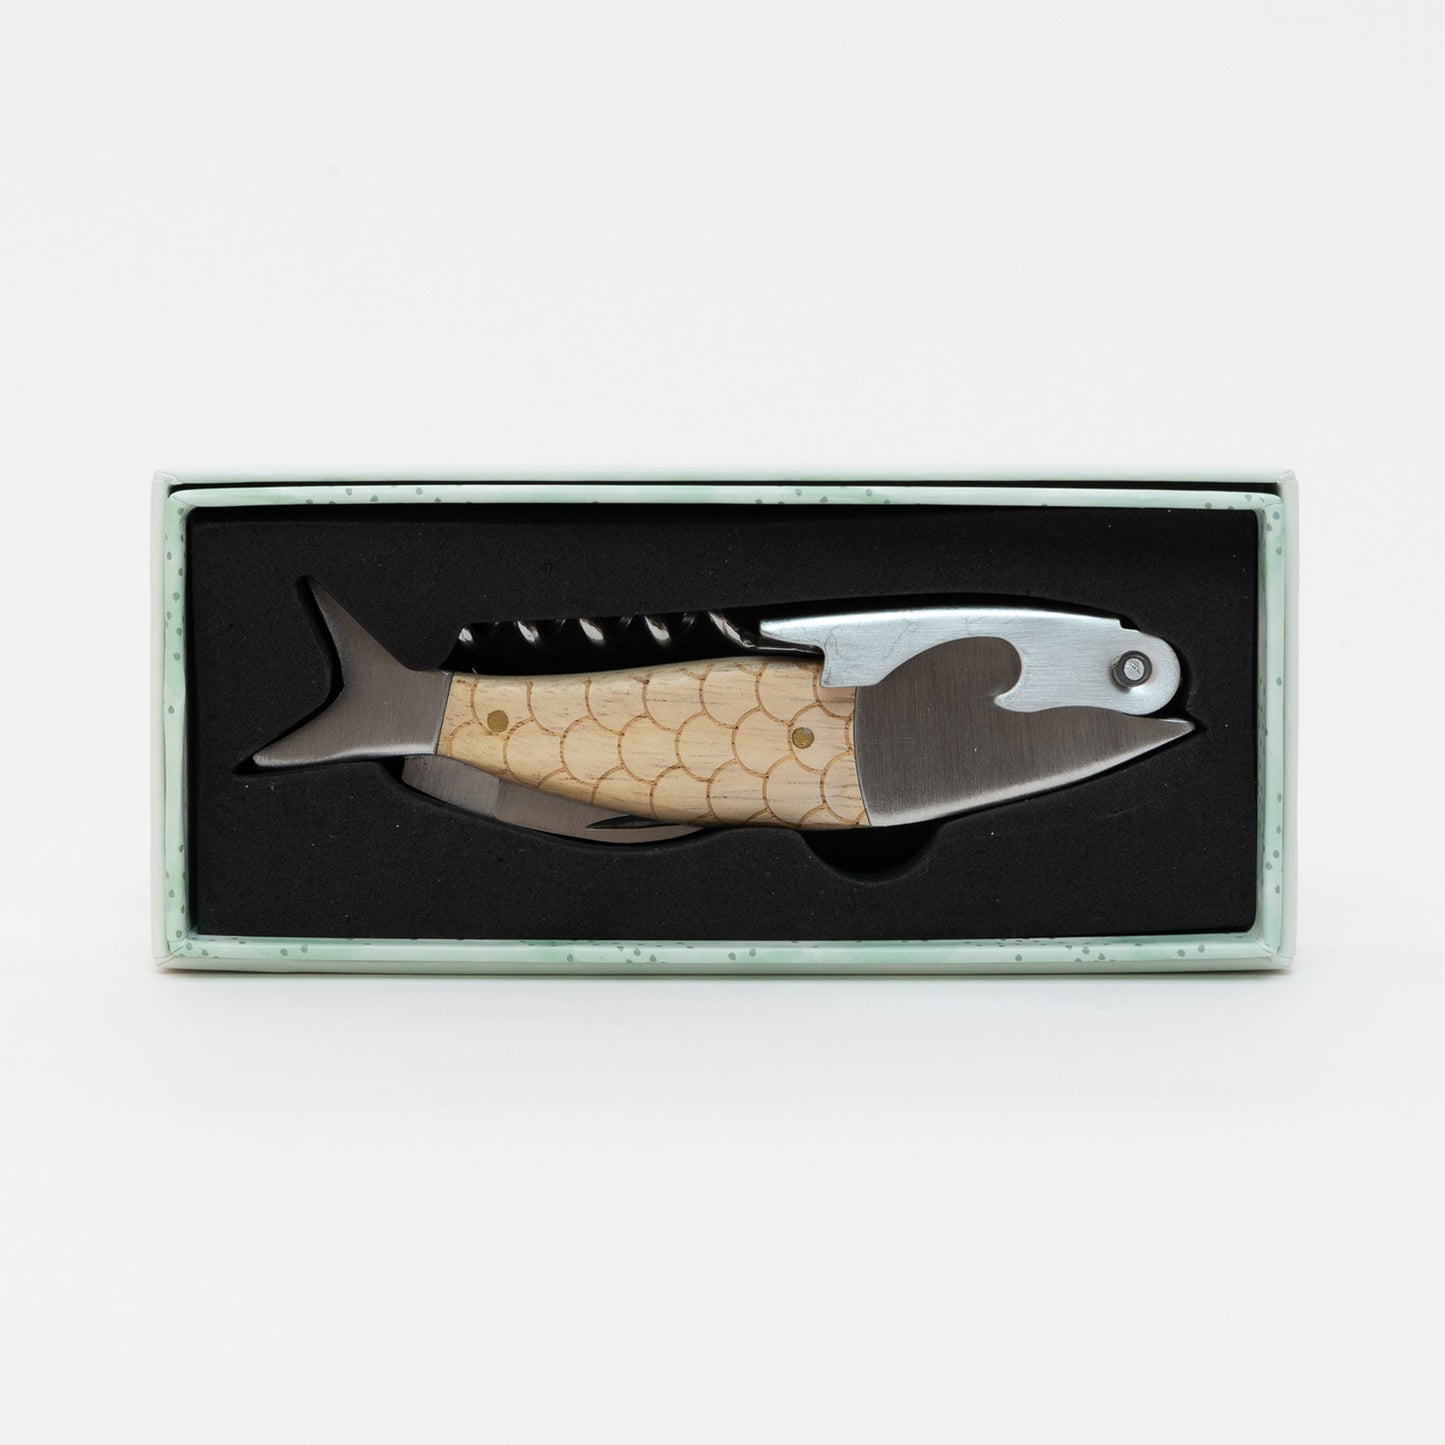 Top down view of the metal and wood fish bottle opener in its box.